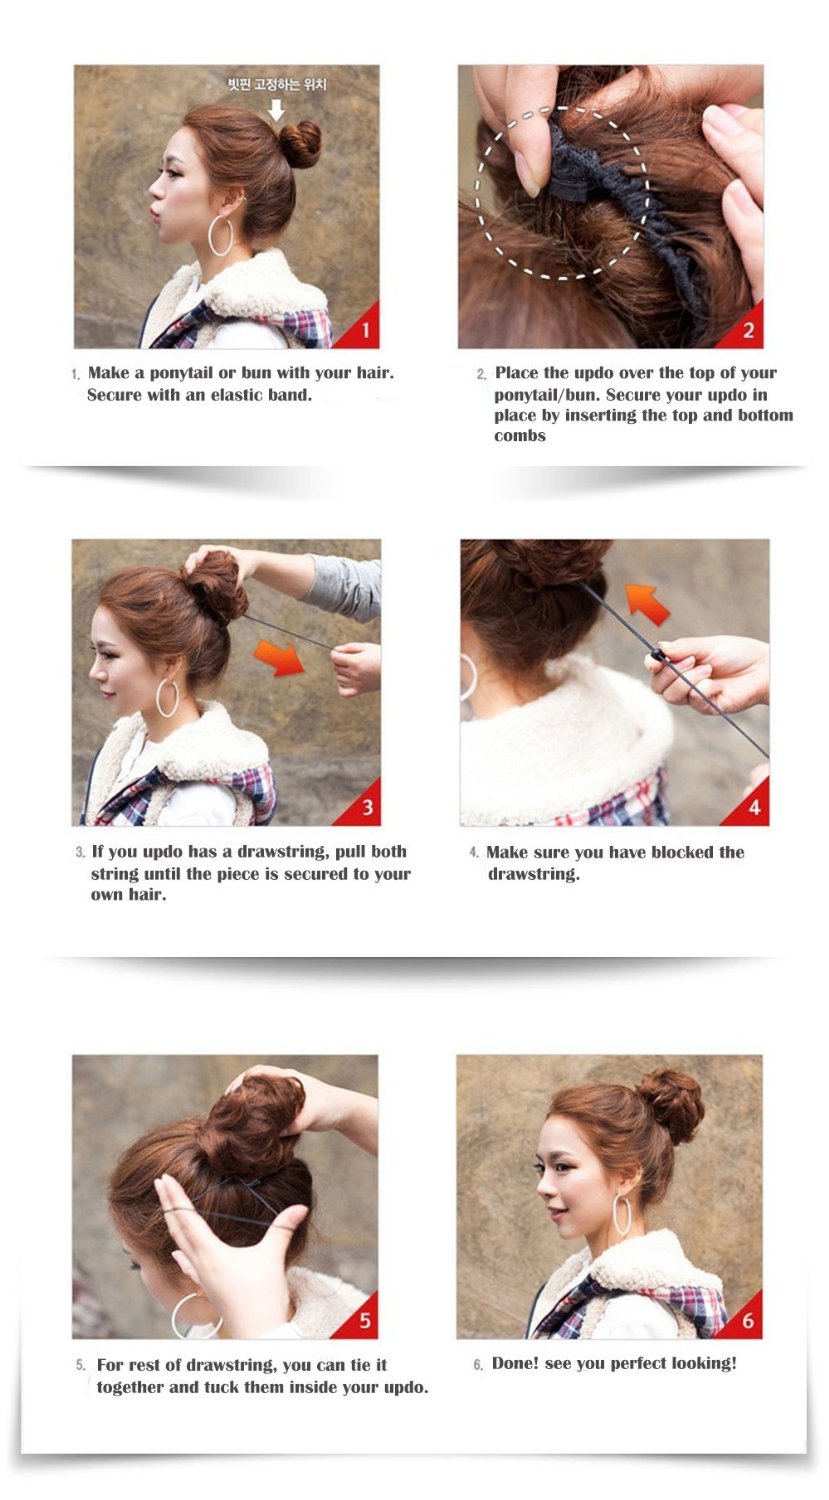 Curly Elastic Hair Chignon Extension Hairpiece Messy Bun Synthetic Clip-in Drawstring Afro Postiche Updo Wedding Q7